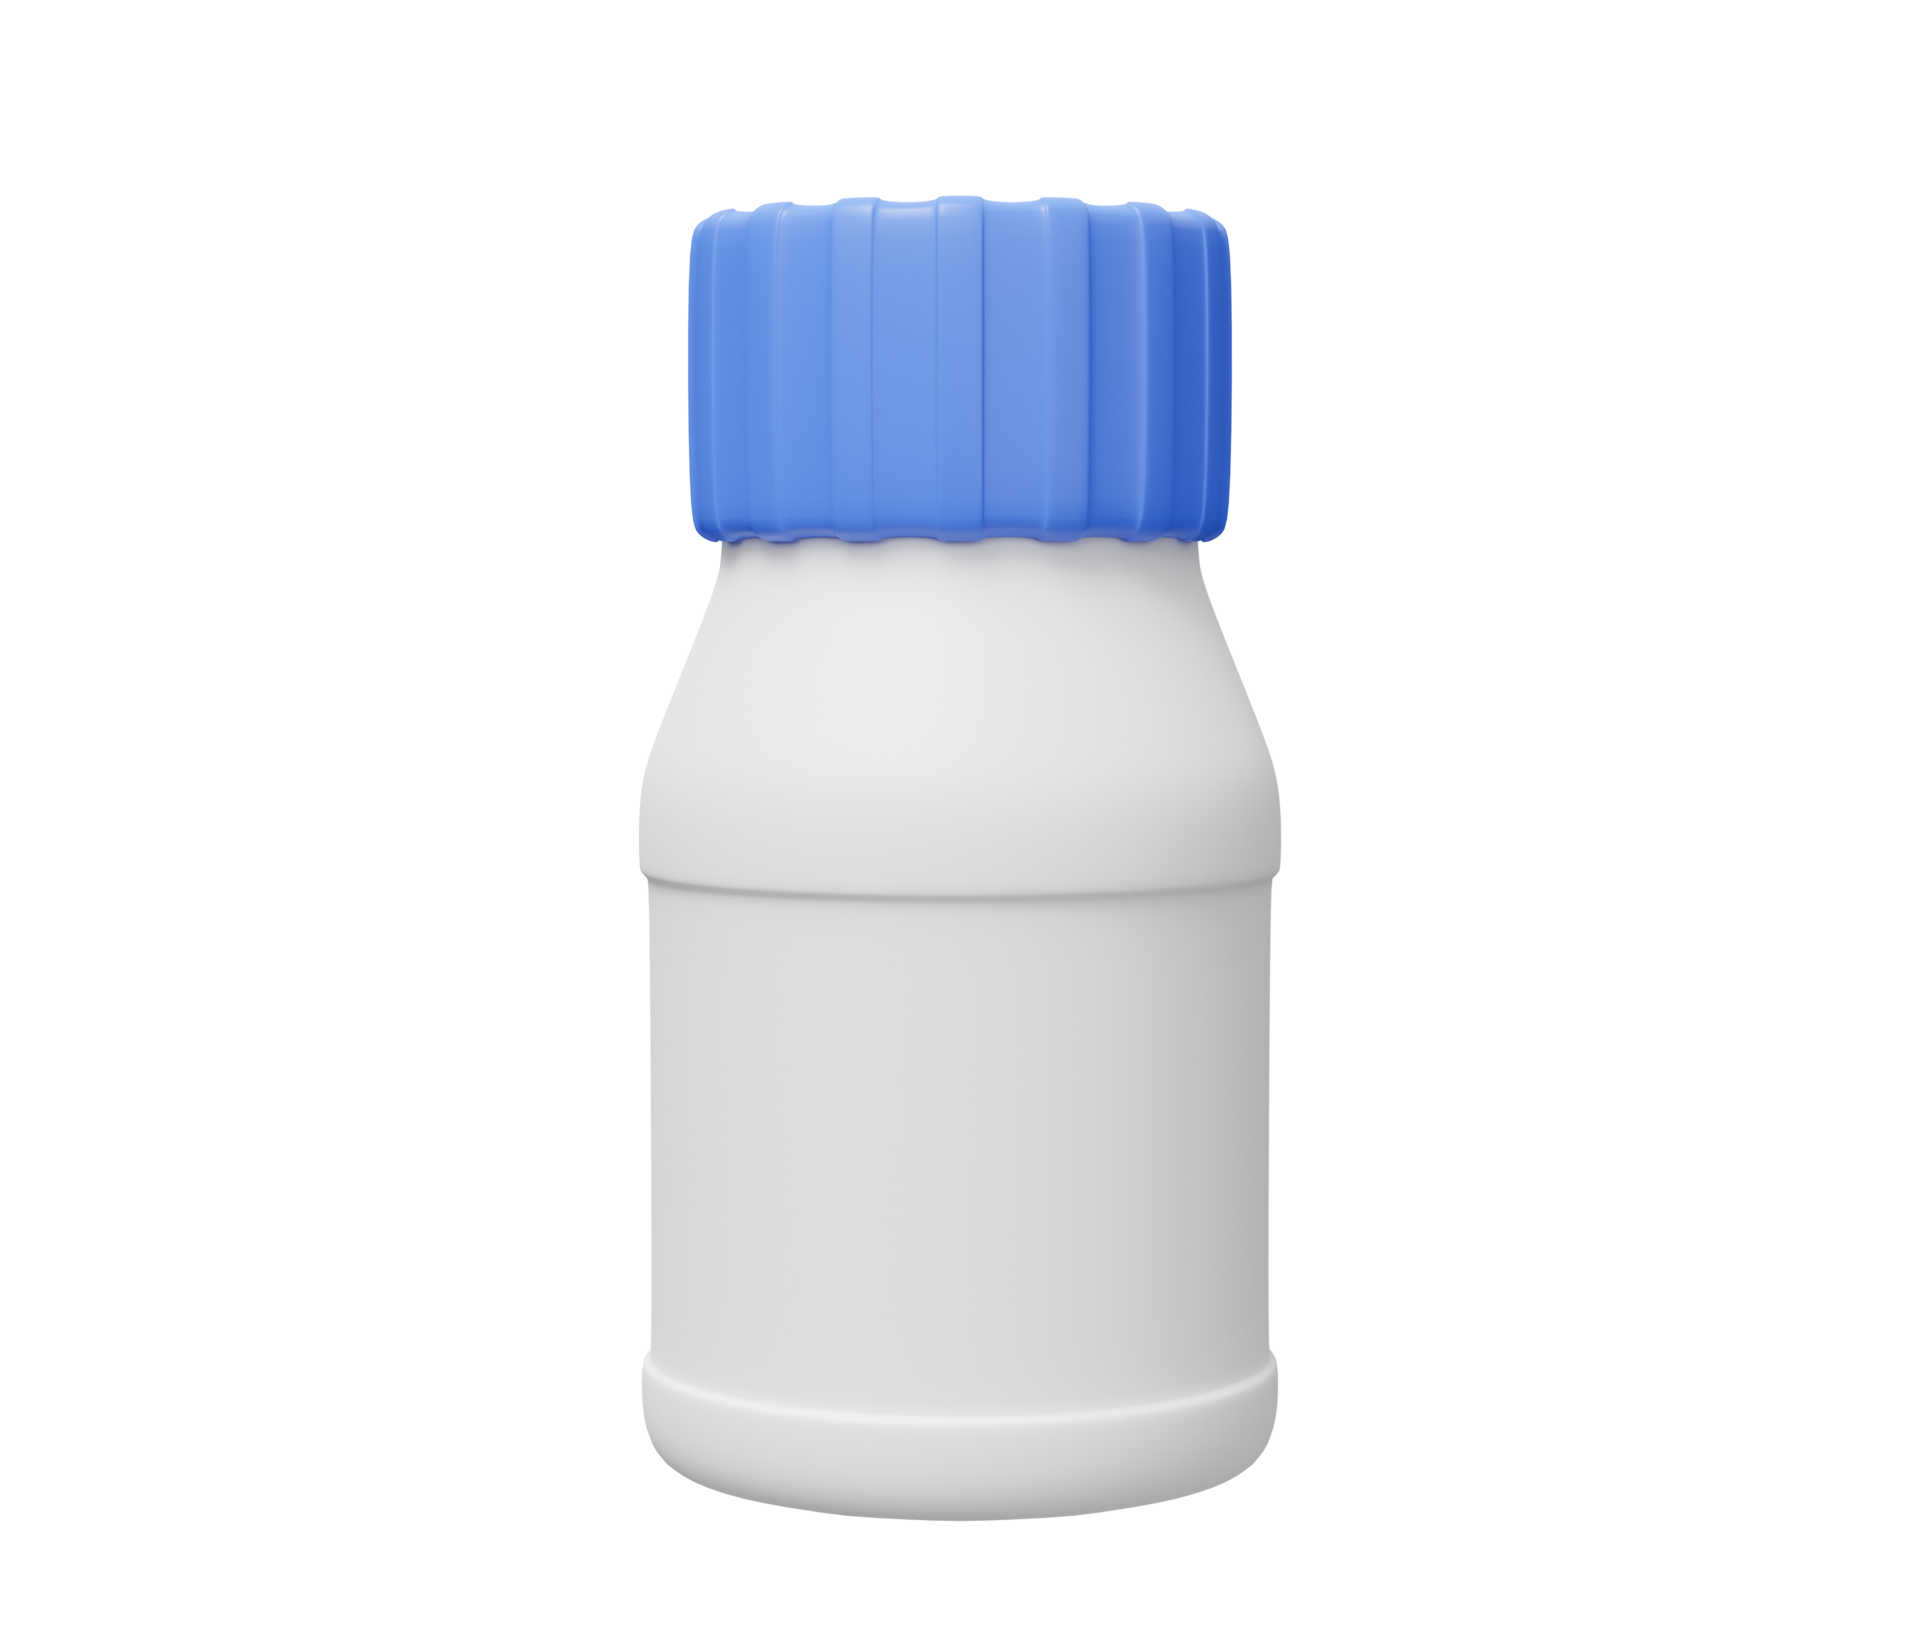 Pill Bottle PNG HD Image